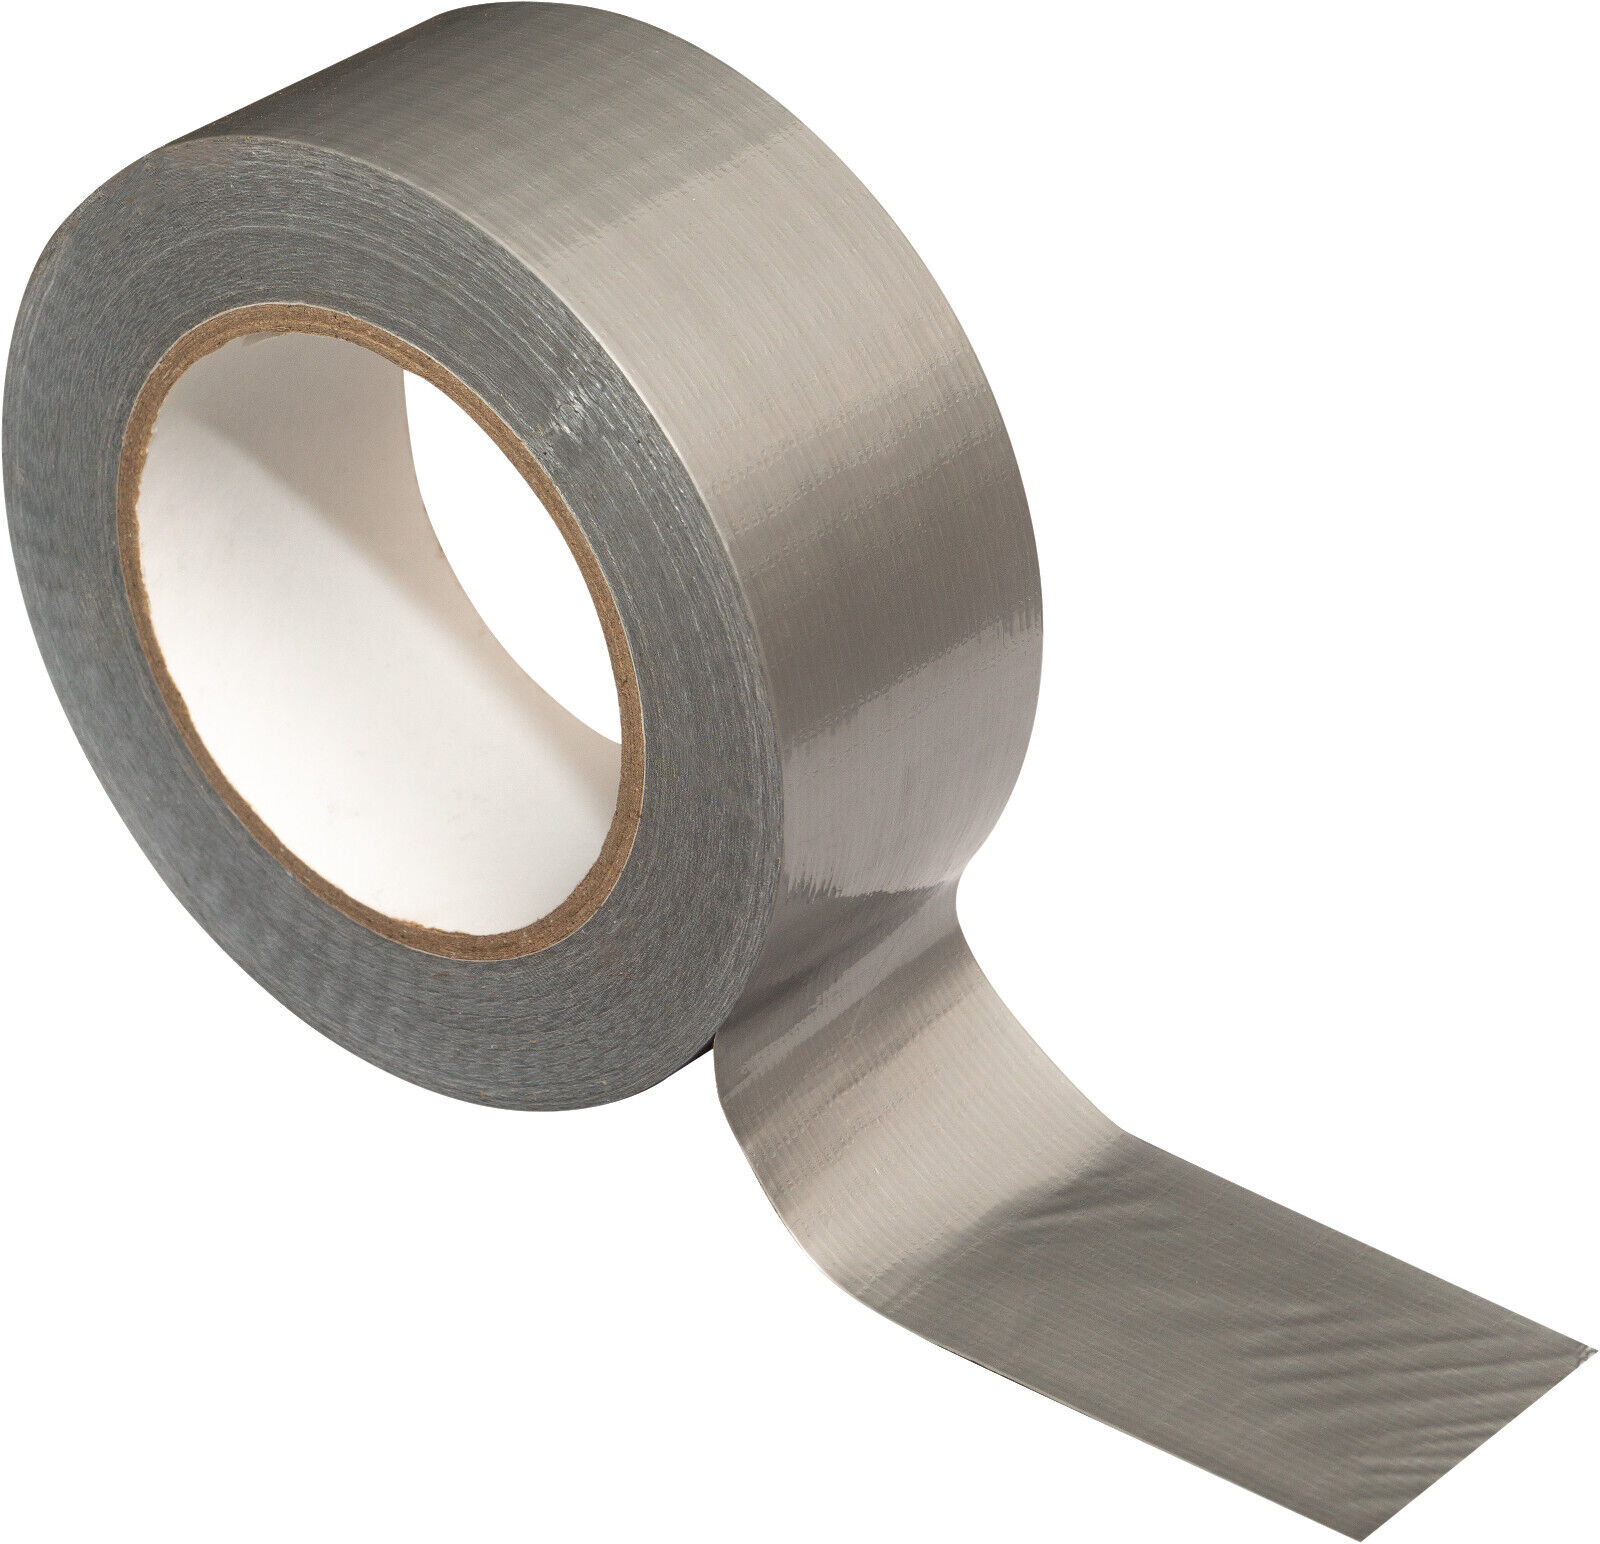 General Purpose Duct Tape 100mm x 50m Silver